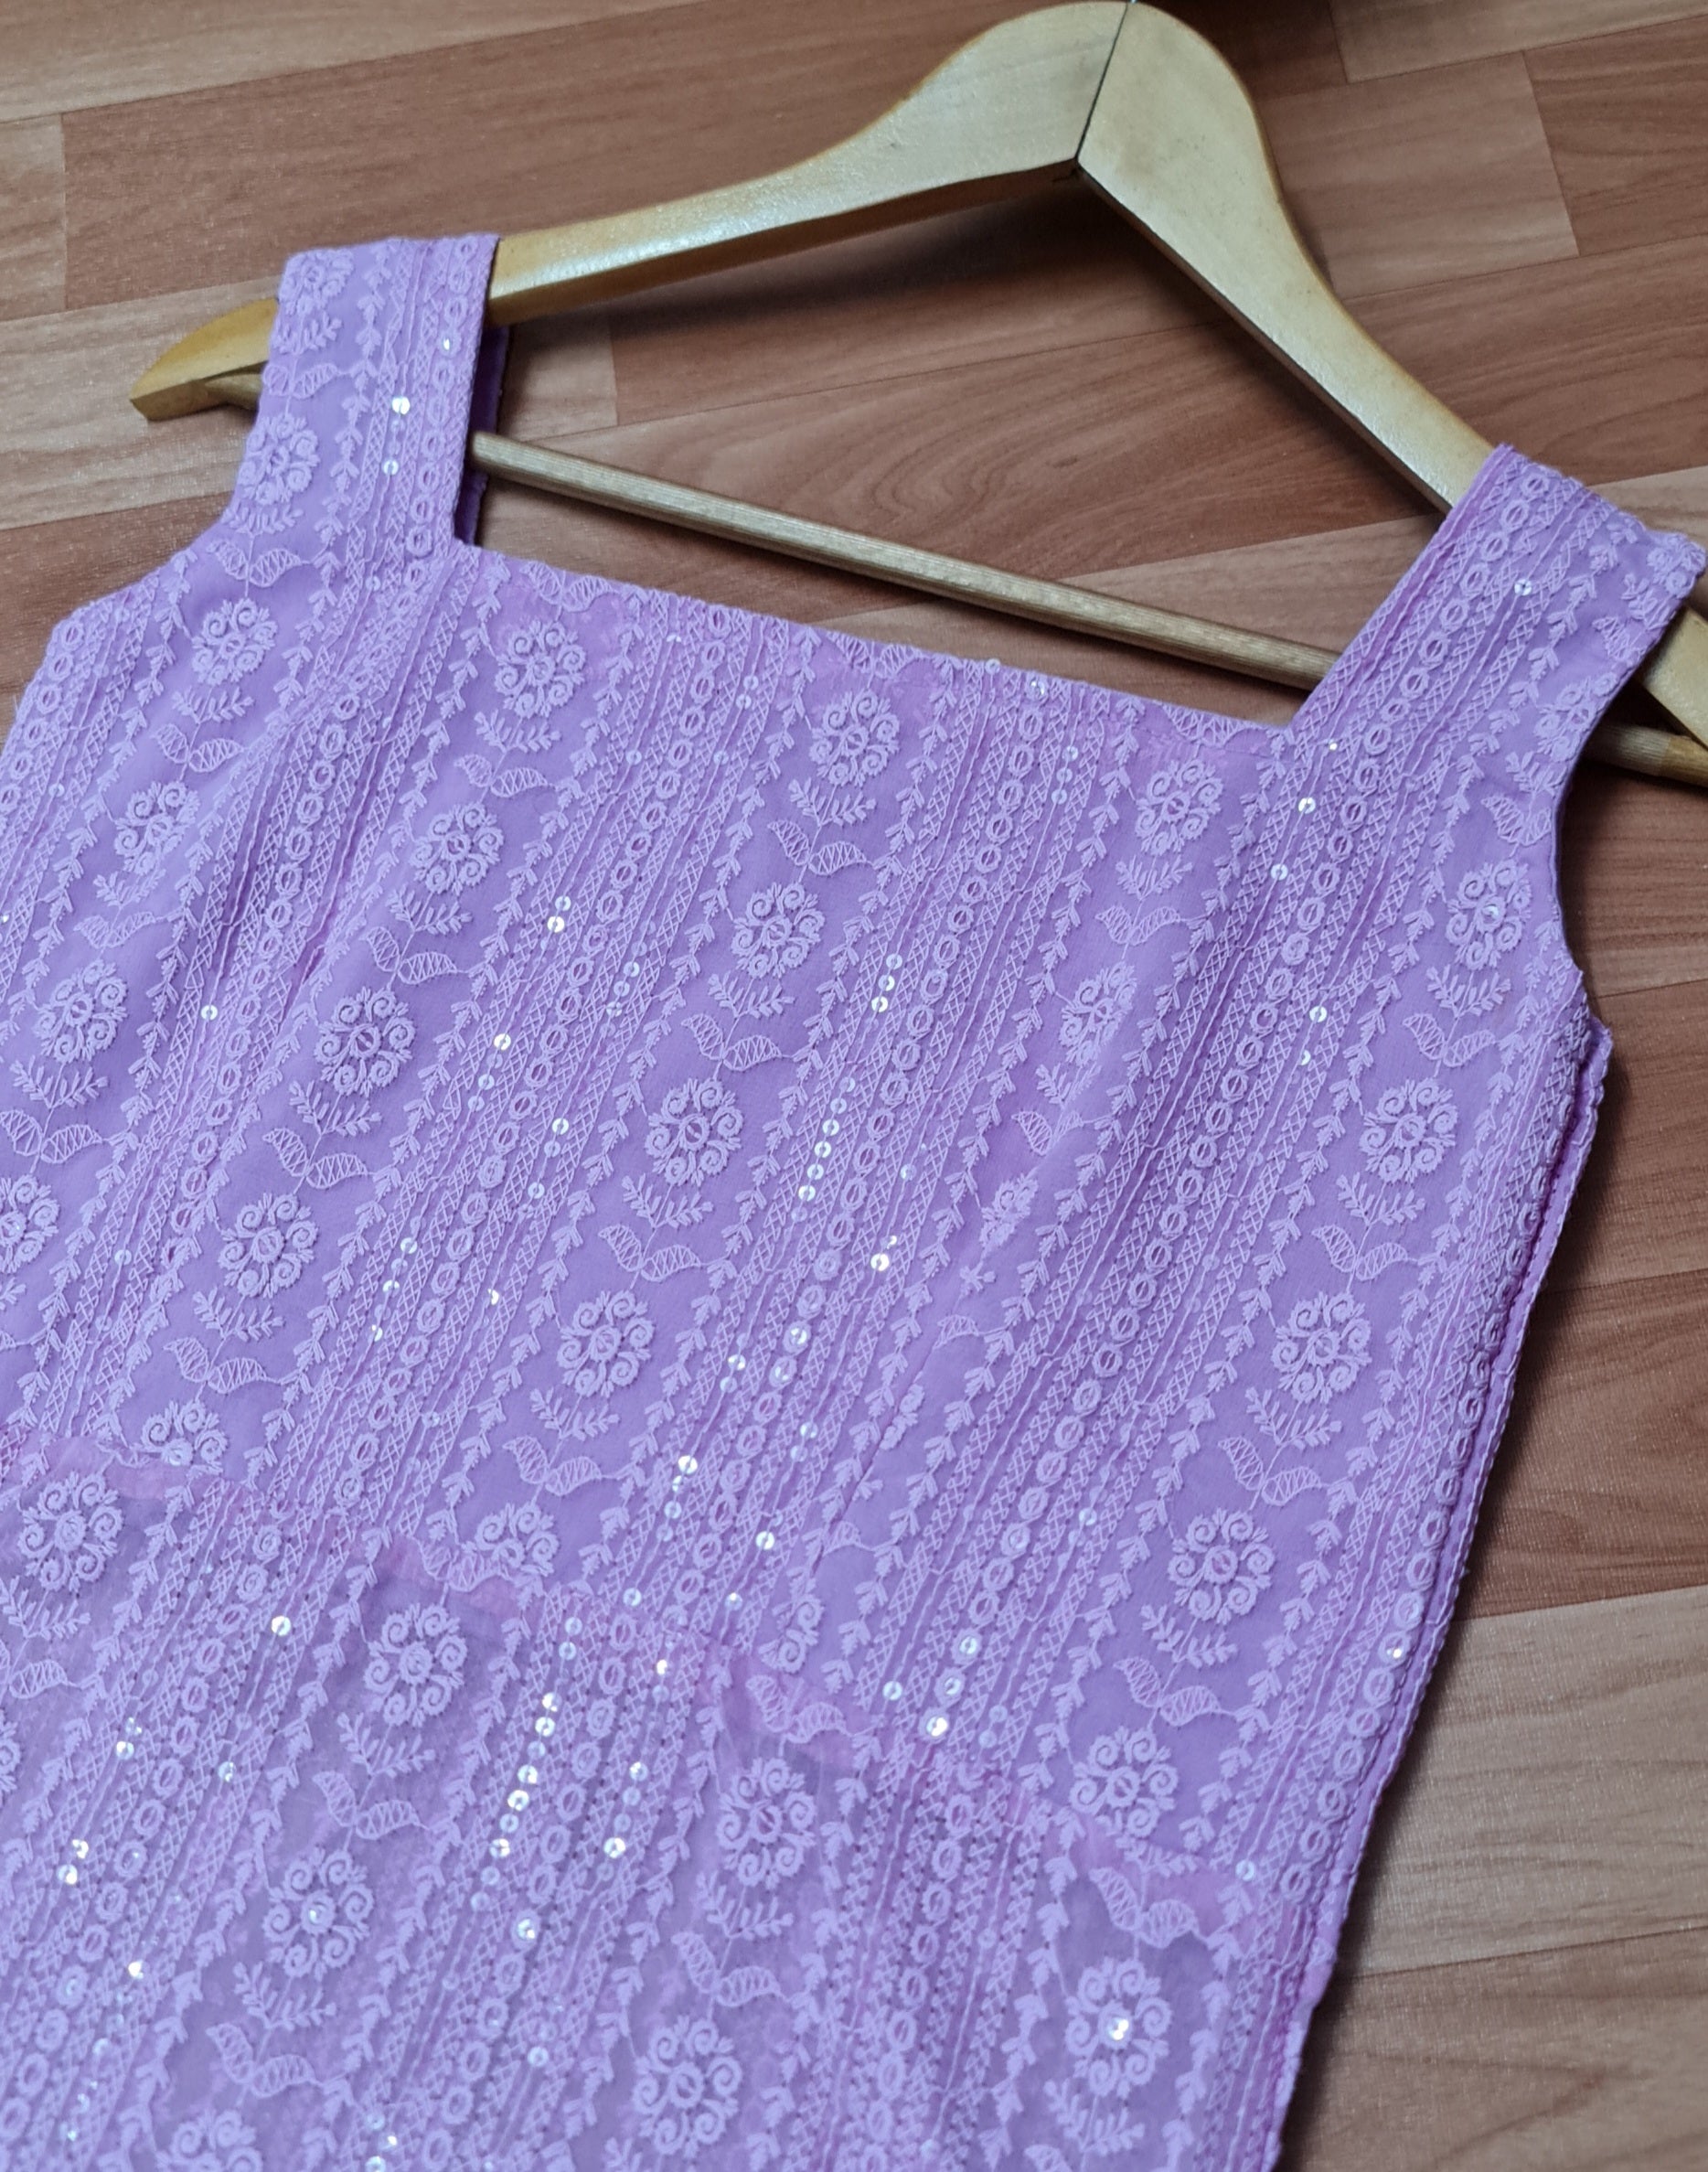 Lavender Chikankari Kurti with Tassels: A long, lavender kurti featuring intricate Chikankari embroidery and delicate side tassels.